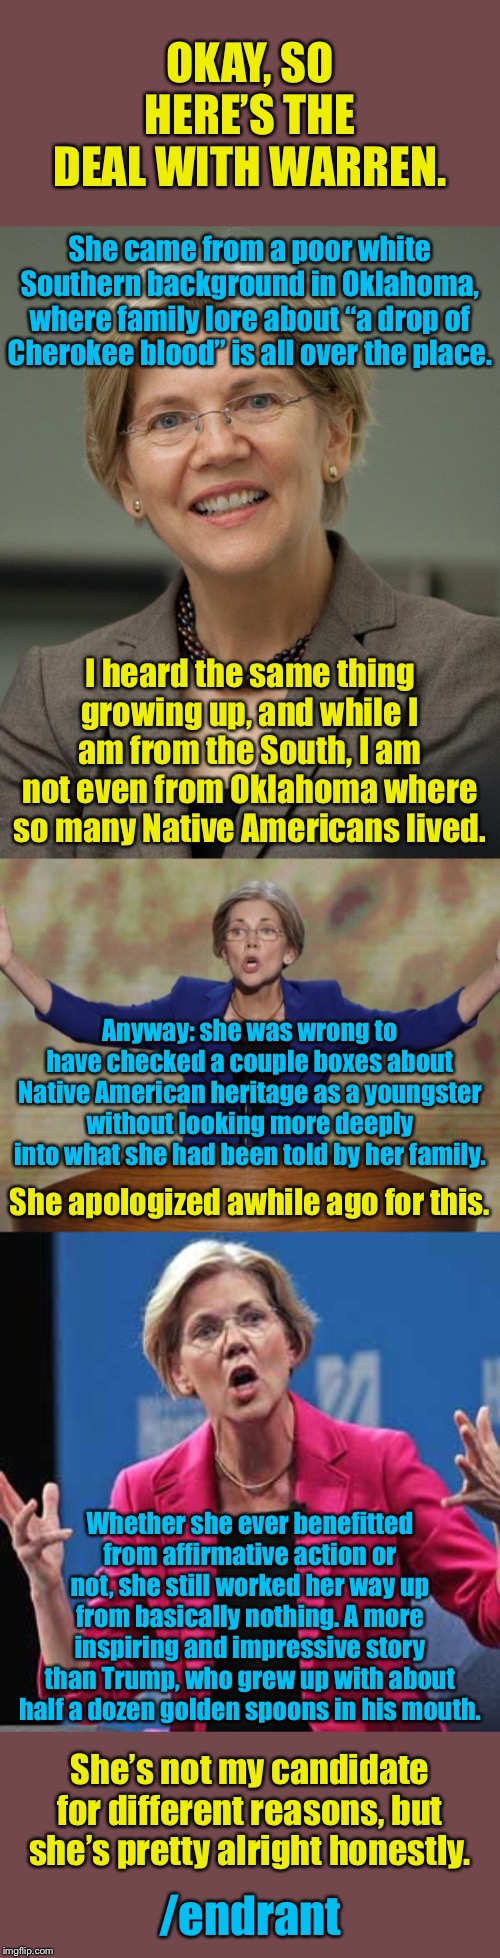 The Fauxcahontas origin story. | OKAY, SO HERE’S THE DEAL WITH WARREN. She came from a poor white Southern background in Oklahoma, where family lore about “a drop of Cherokee blood” is all over the place. I heard the same thing growing up, and while I am from the South, I am not even from Oklahoma where so many Native Americans lived. Anyway: she was wrong to have checked a couple boxes about Native American heritage as a youngster without looking more deeply into what she had been told by her family. She apologized awhile ago for this. Whether she ever benefitted from affirmative action or not, she still worked her way up from basically nothing. A more inspiring and impressive story than Trump, who grew up with about half a dozen golden spoons in his mouth. She’s not my candidate for different reasons, but she’s pretty alright honestly. /endrant | image tagged in elizabeth warren,pocahontas,warren,politics,democrats,election 2020 | made w/ Imgflip meme maker